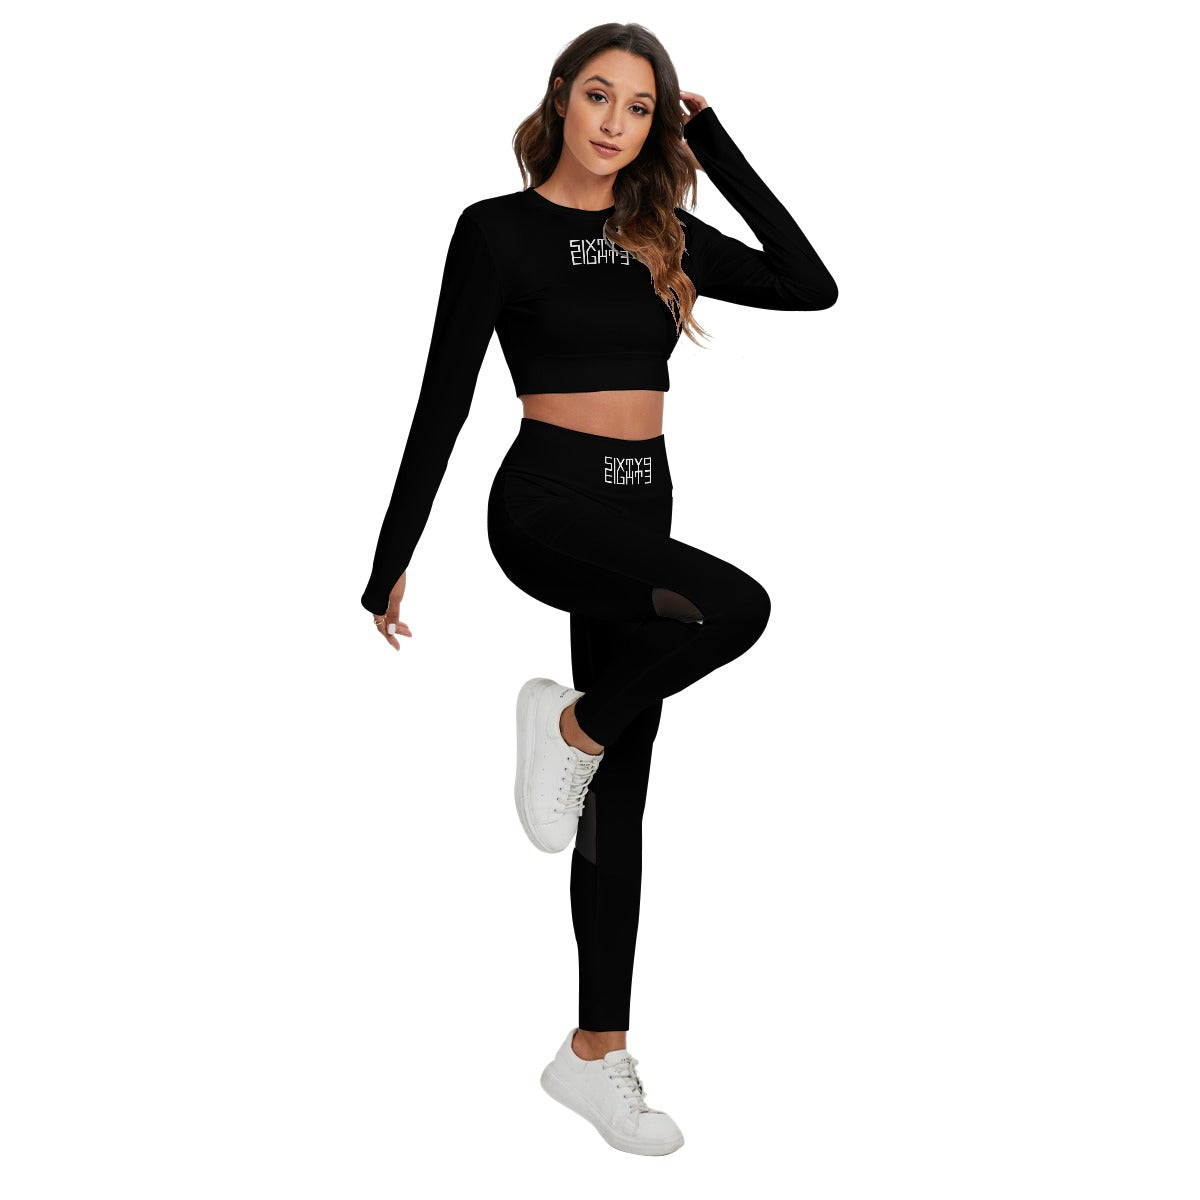 Sixty Eight 93 Logo White Black Women's Sport Set With Backless Top And Leggings